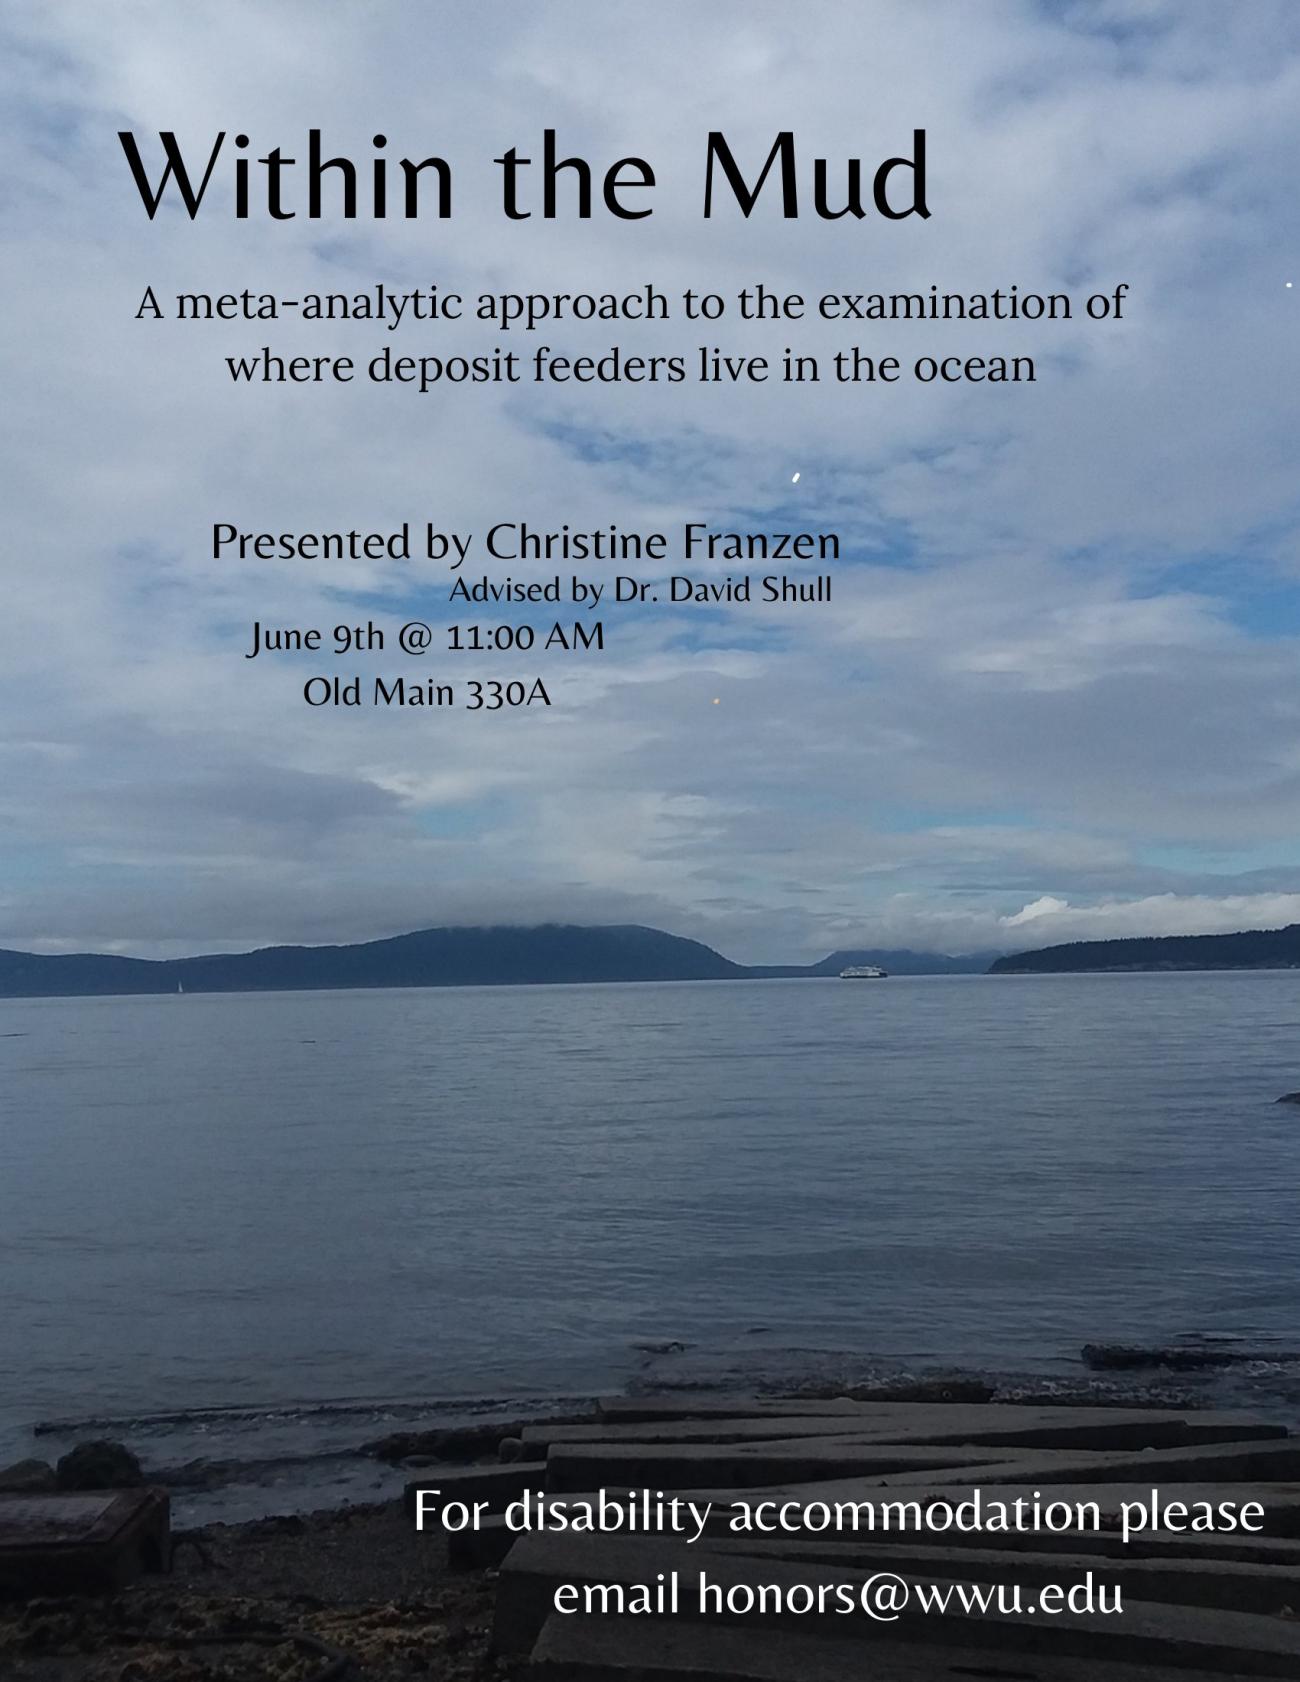 Poster depicting a body of water with a boat near the mountains and a wooden plank path leading into the shoreline. Text reads: "Within the Mud, a meta-anaytic approach to the examination of where deposit feeders live in the ocean. Presented by Christine Franzen, Advised by Dr. David Shull. June 9th at 11:00 AM, Old Main 330A. For disability accommodation please email honors@wwu.edu."